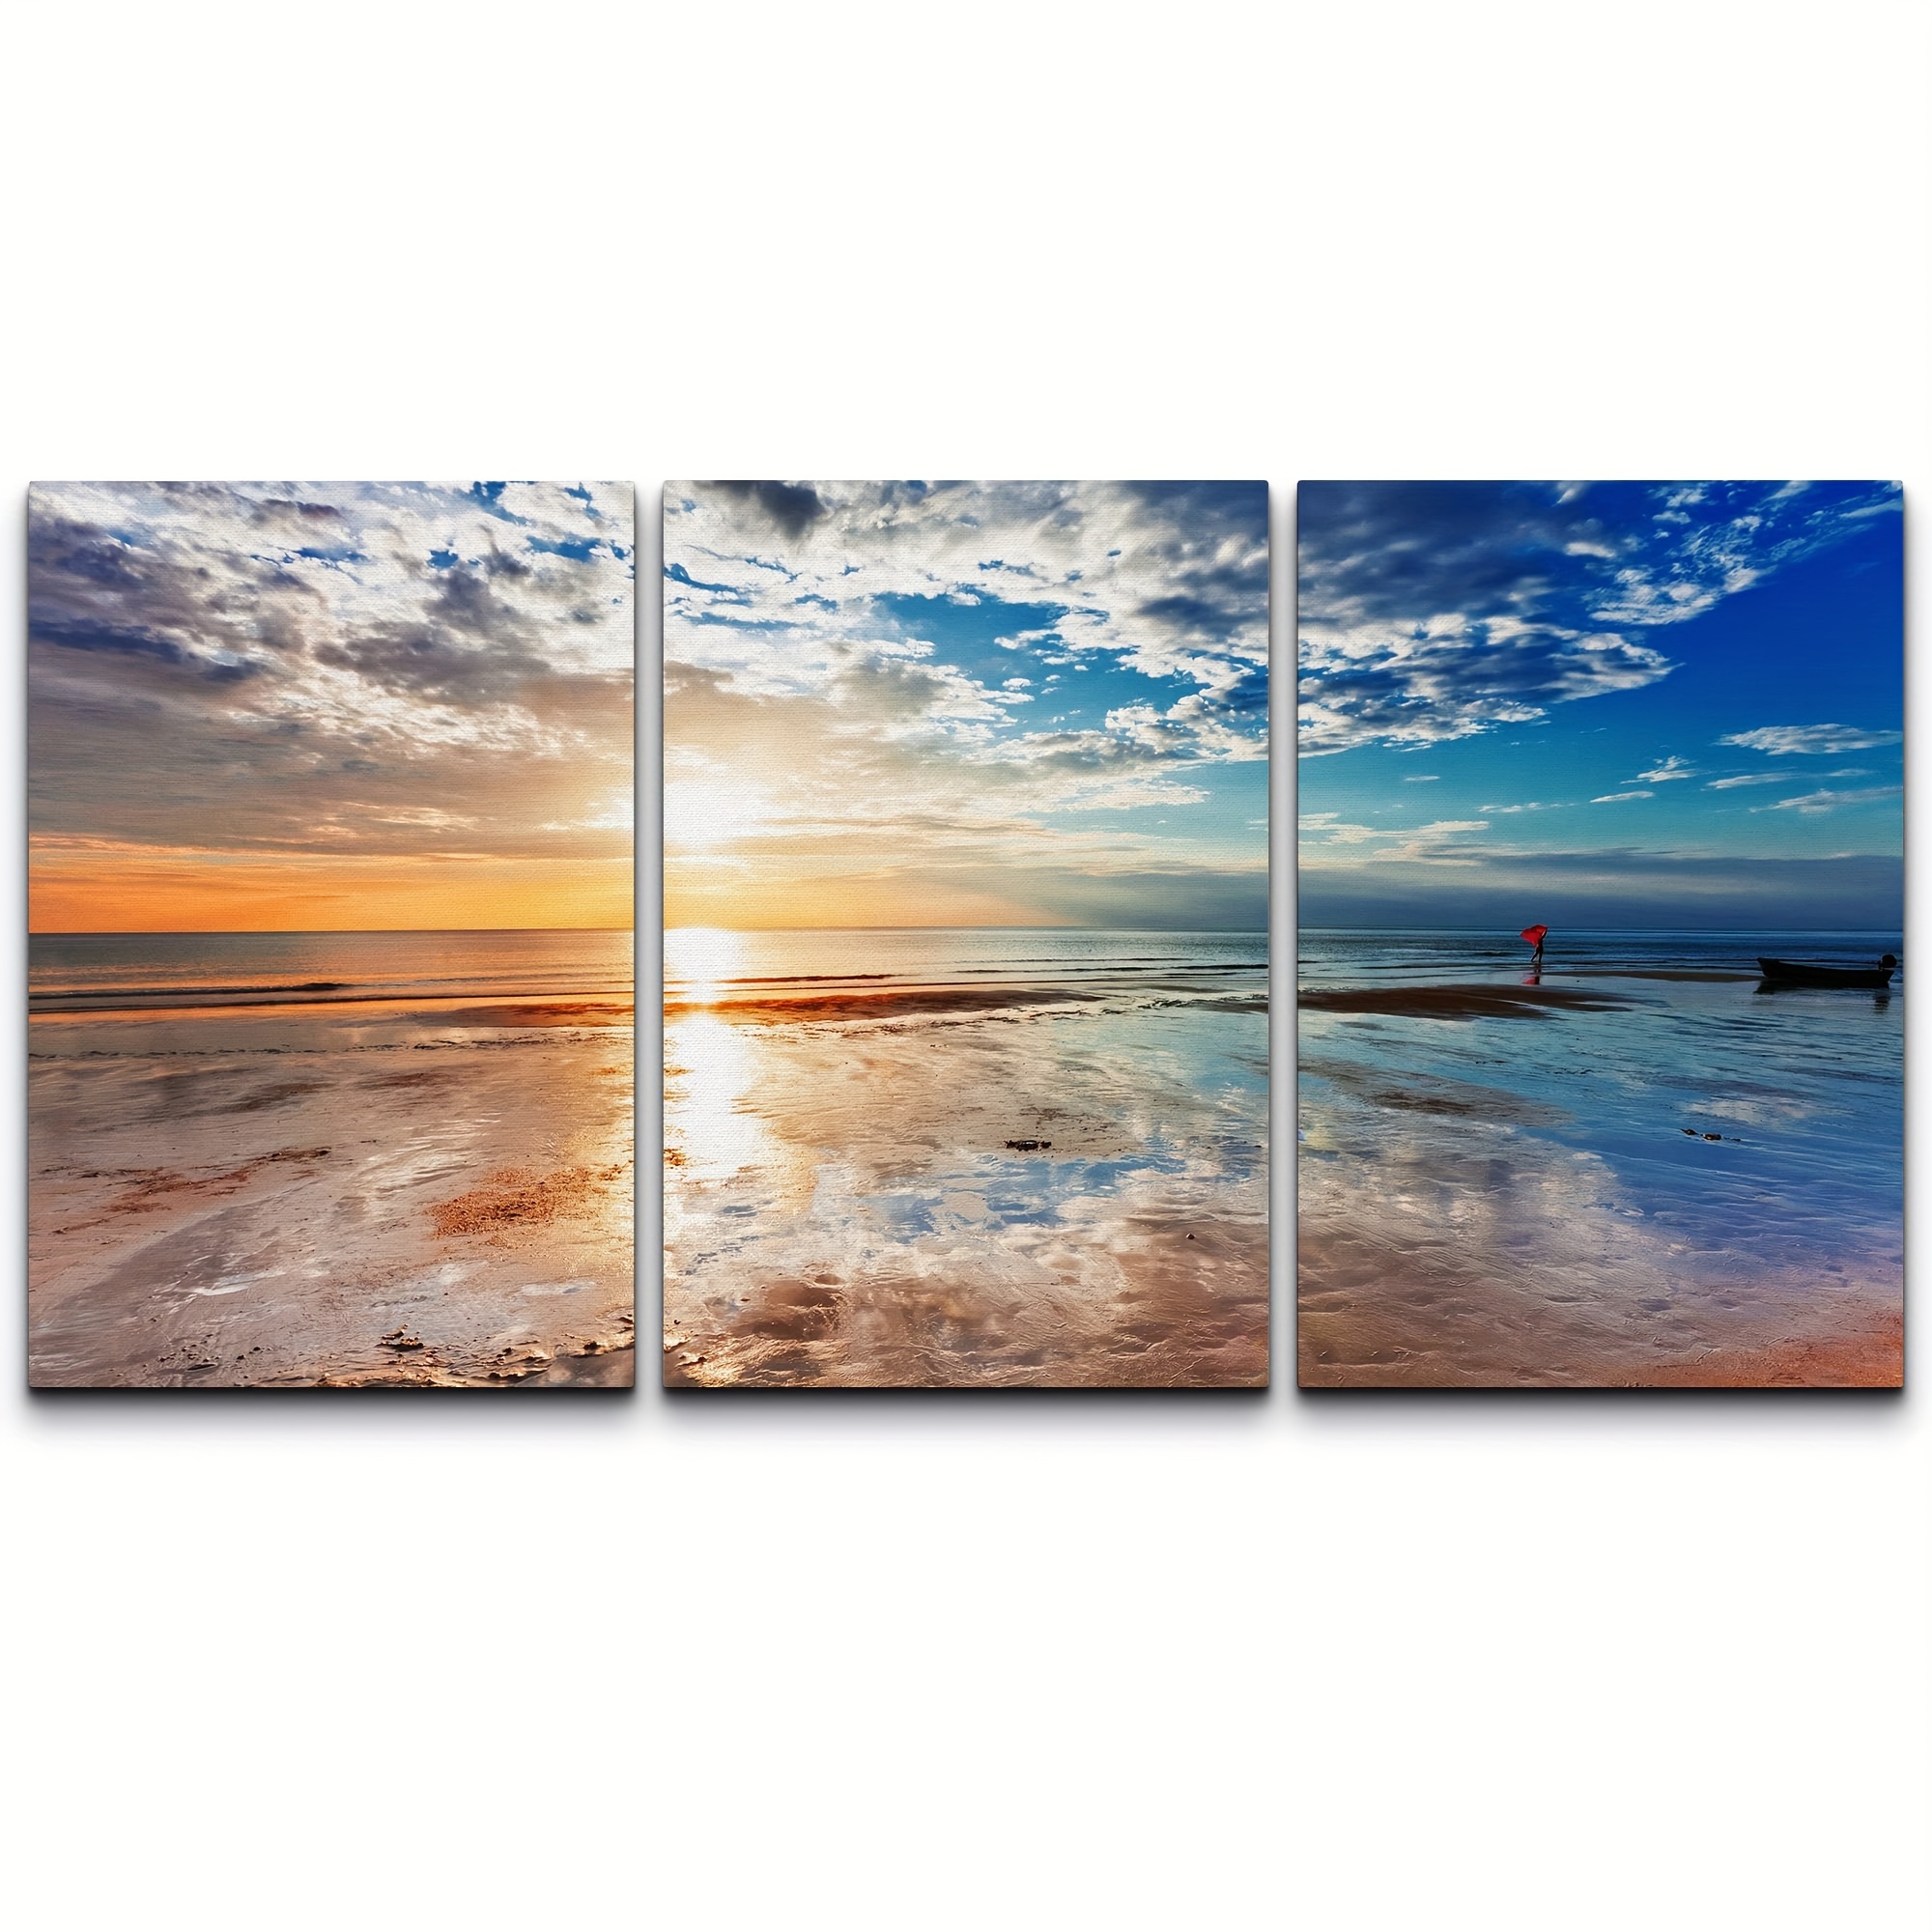 6pcs 4x4 Inch Stretched Canvas For Painting, 4x4 Inch Profile Value Bulk  Pack For Acrylics, Oils Painting